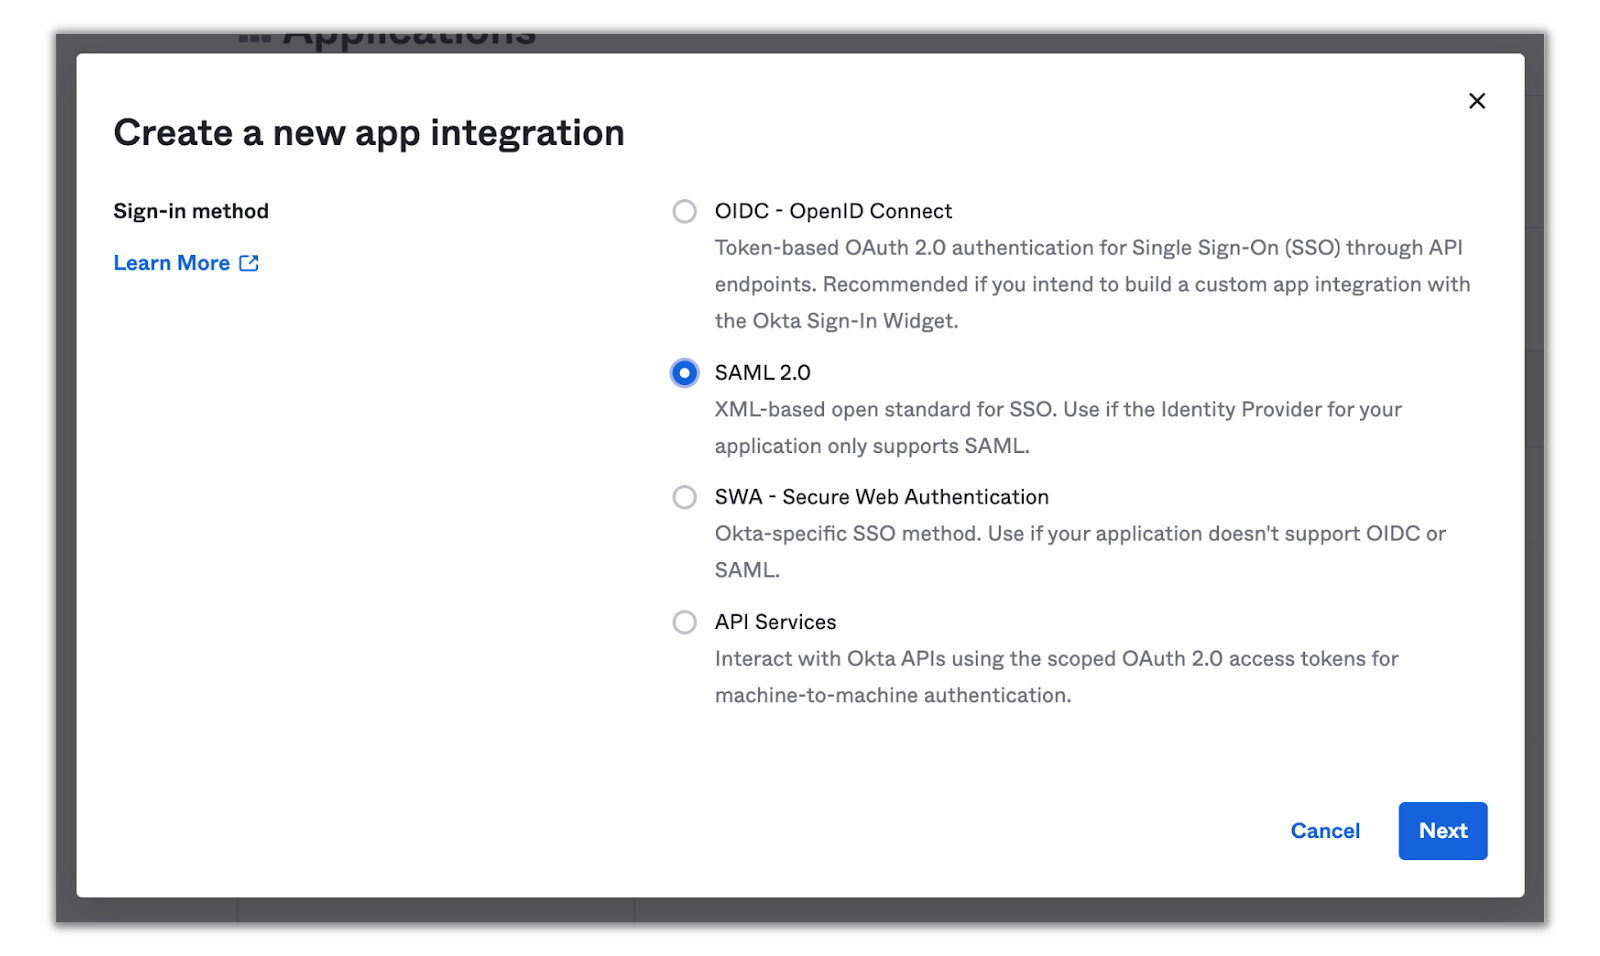 Sign-in method selection for new app integration